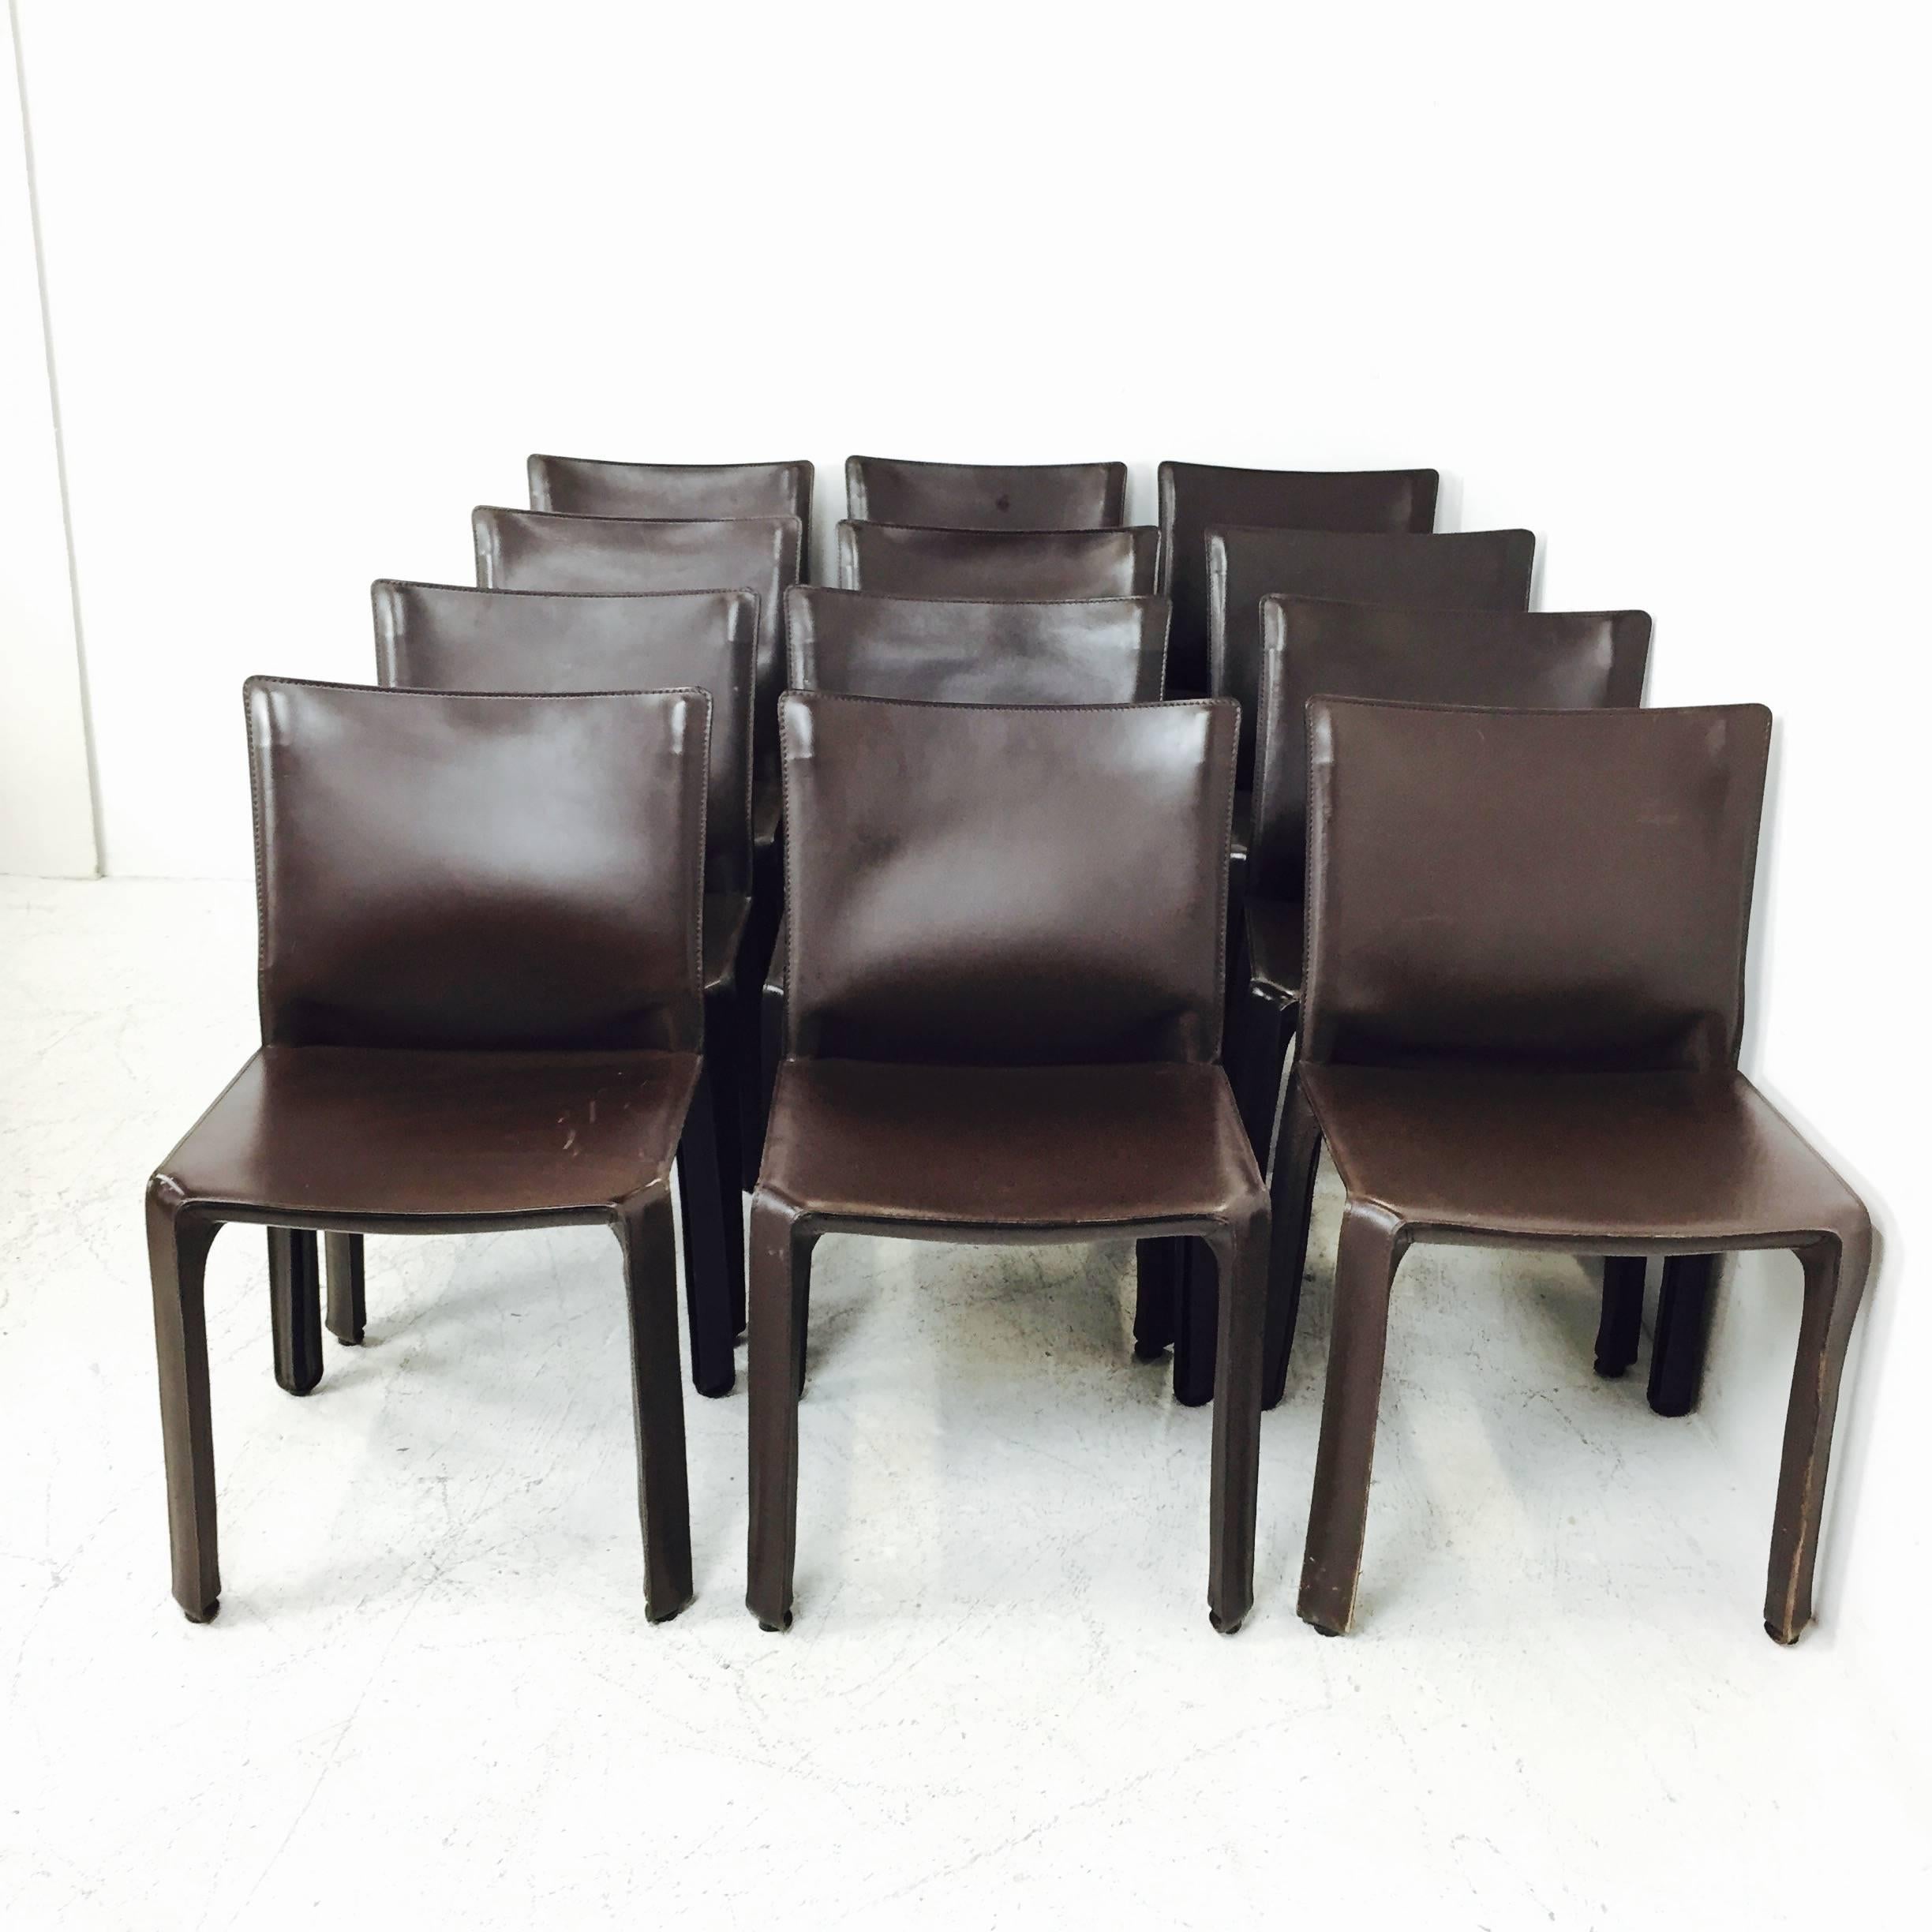 Espresso Brown Mario Bellini Cab Leather Dining Chairs (3 Available) 1